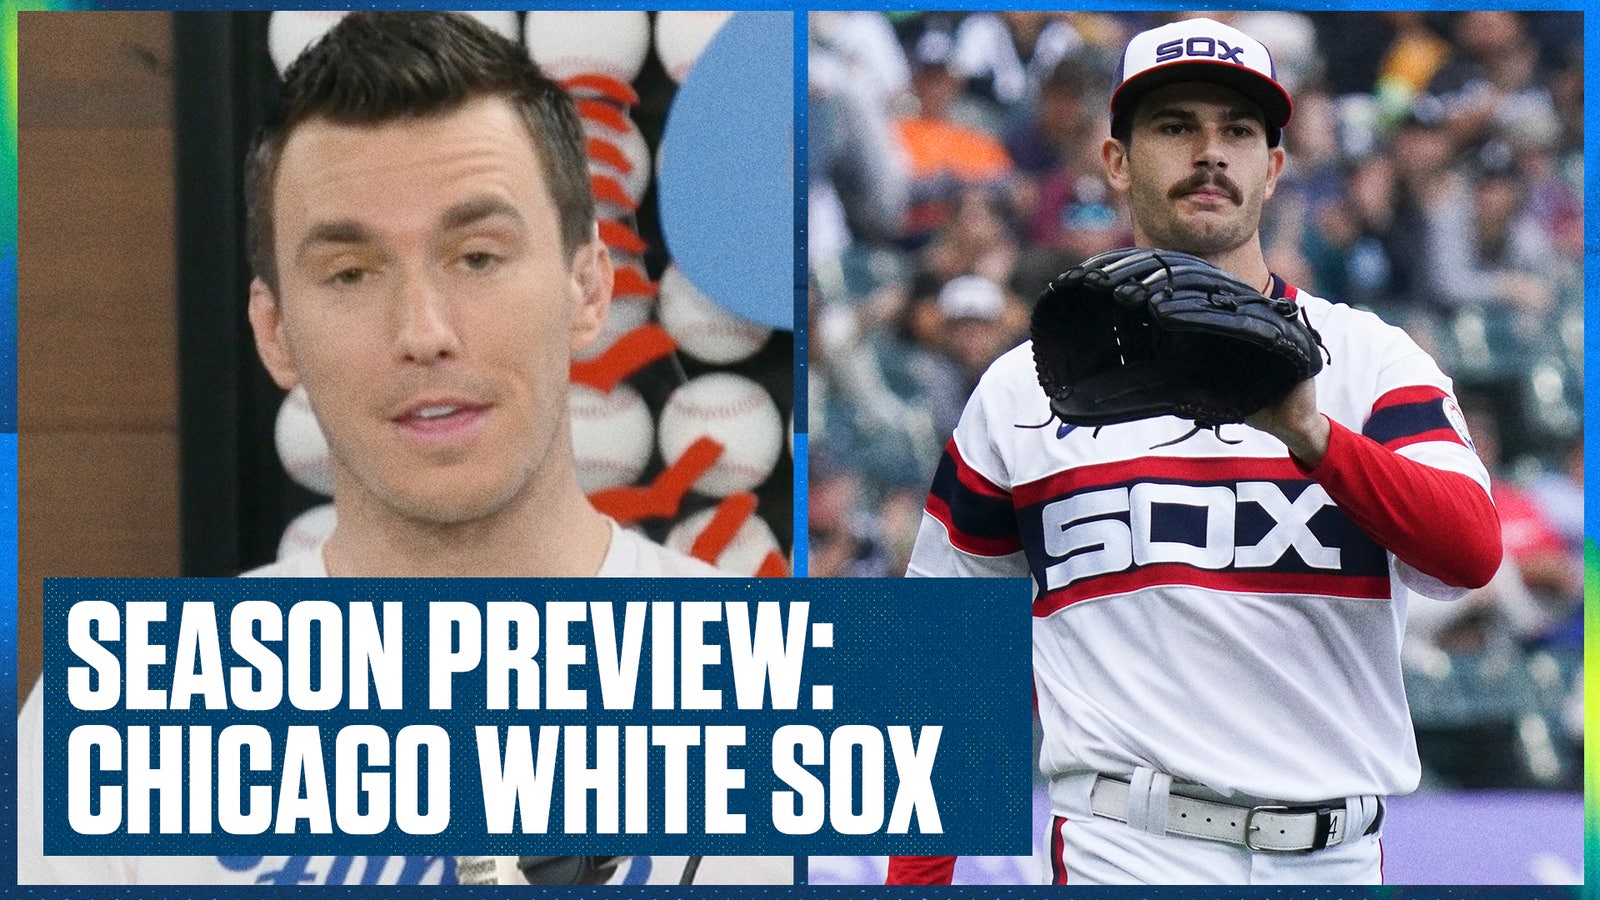 Chicago White Sox Season Preview: Can they bounce back from last year's disaster 